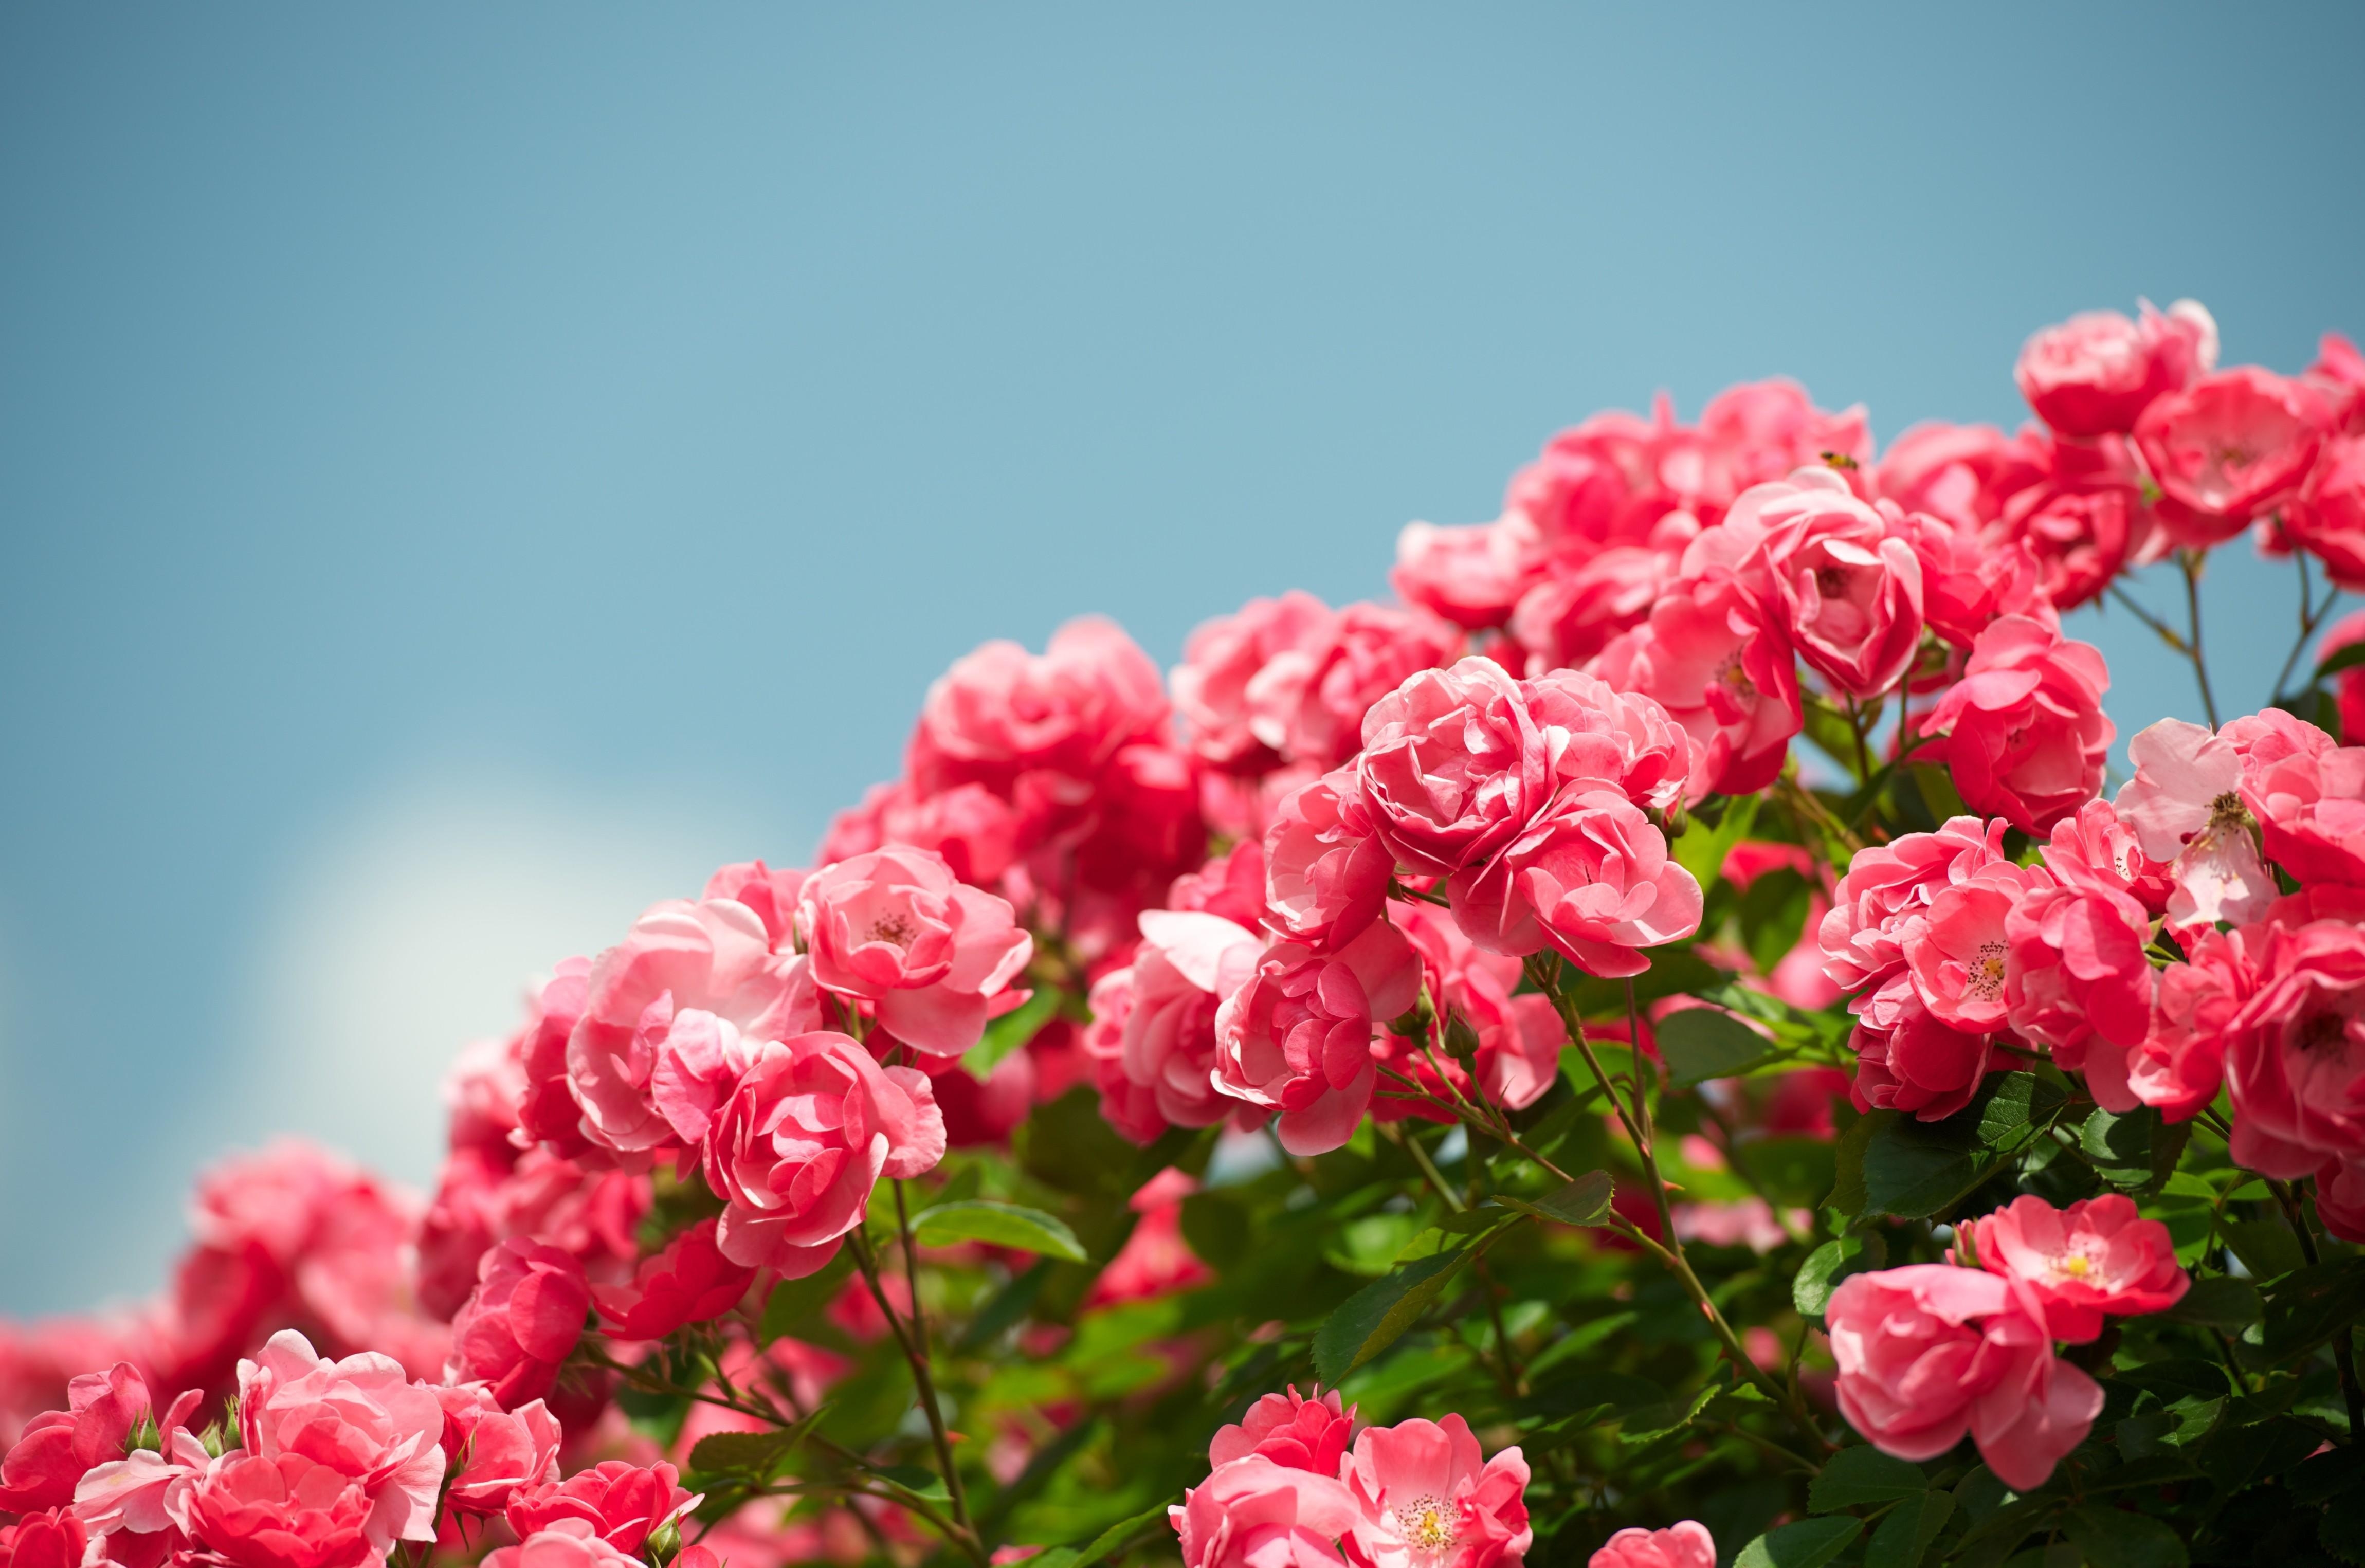 sky, flowers, roses, bush, handsomely, it's beautiful, sharpness